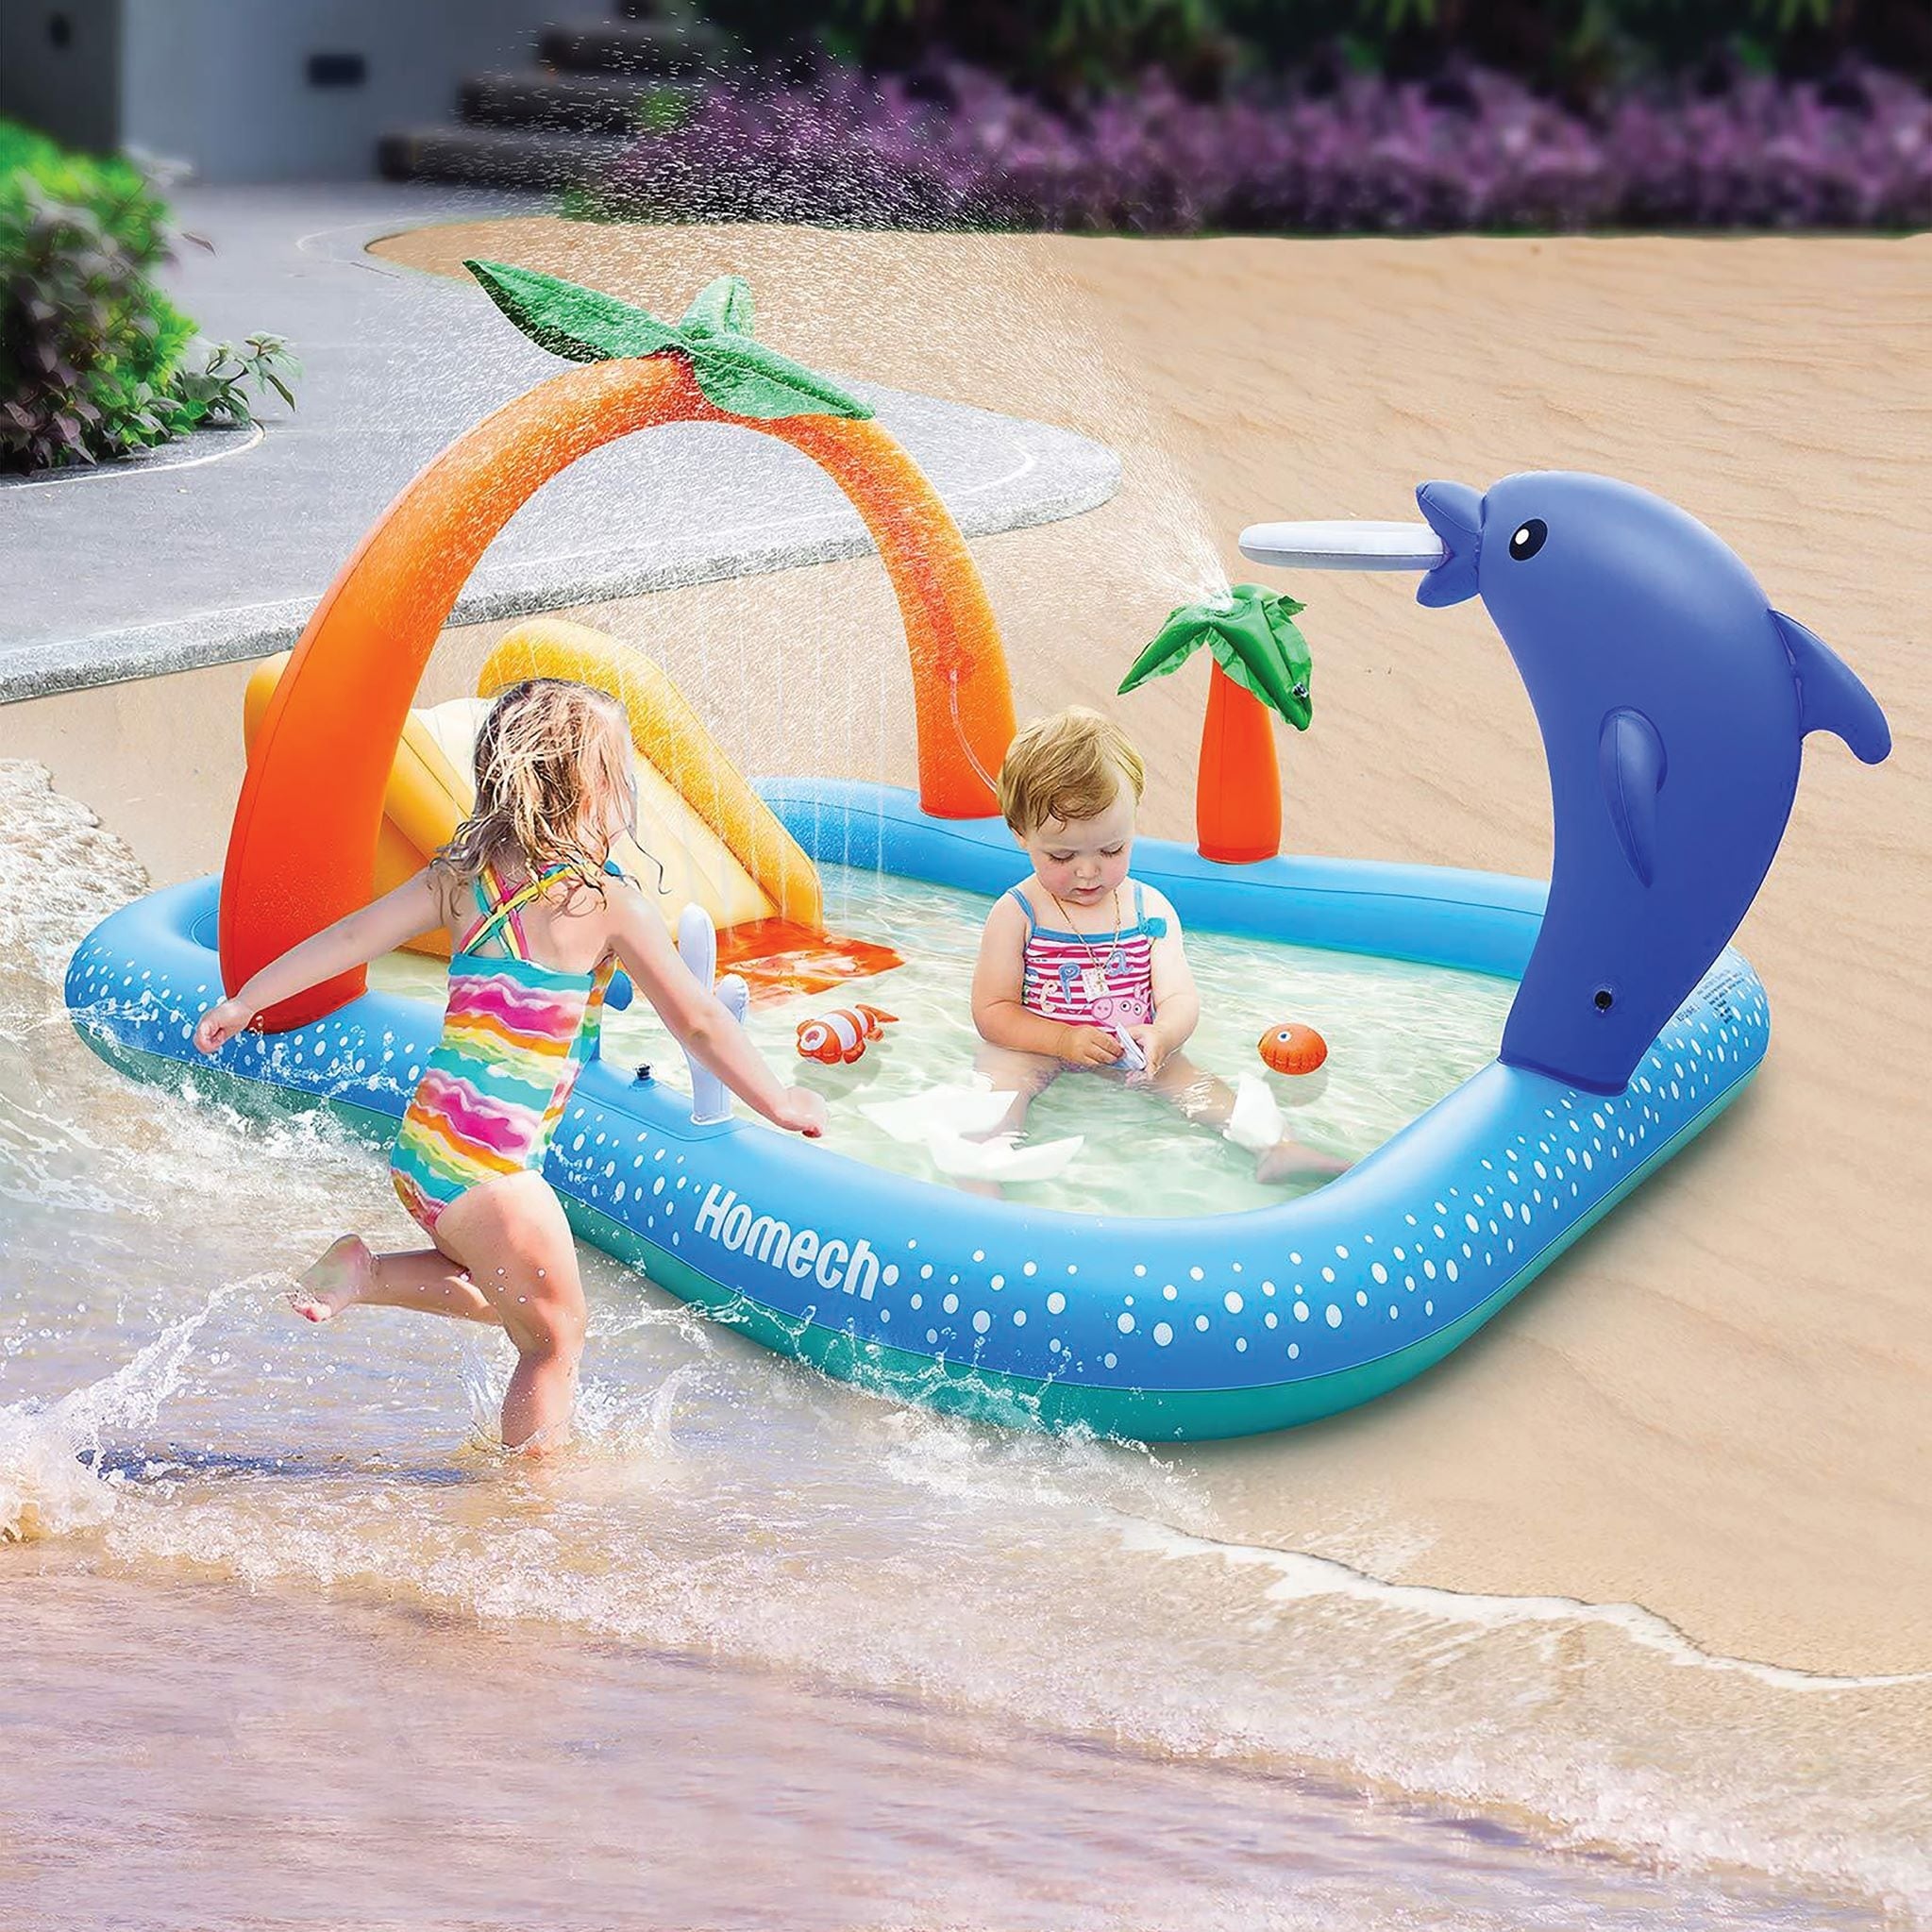 Homech Inflatable Play Center Pool 95 x 75 x 40 - Overstock - 35752137